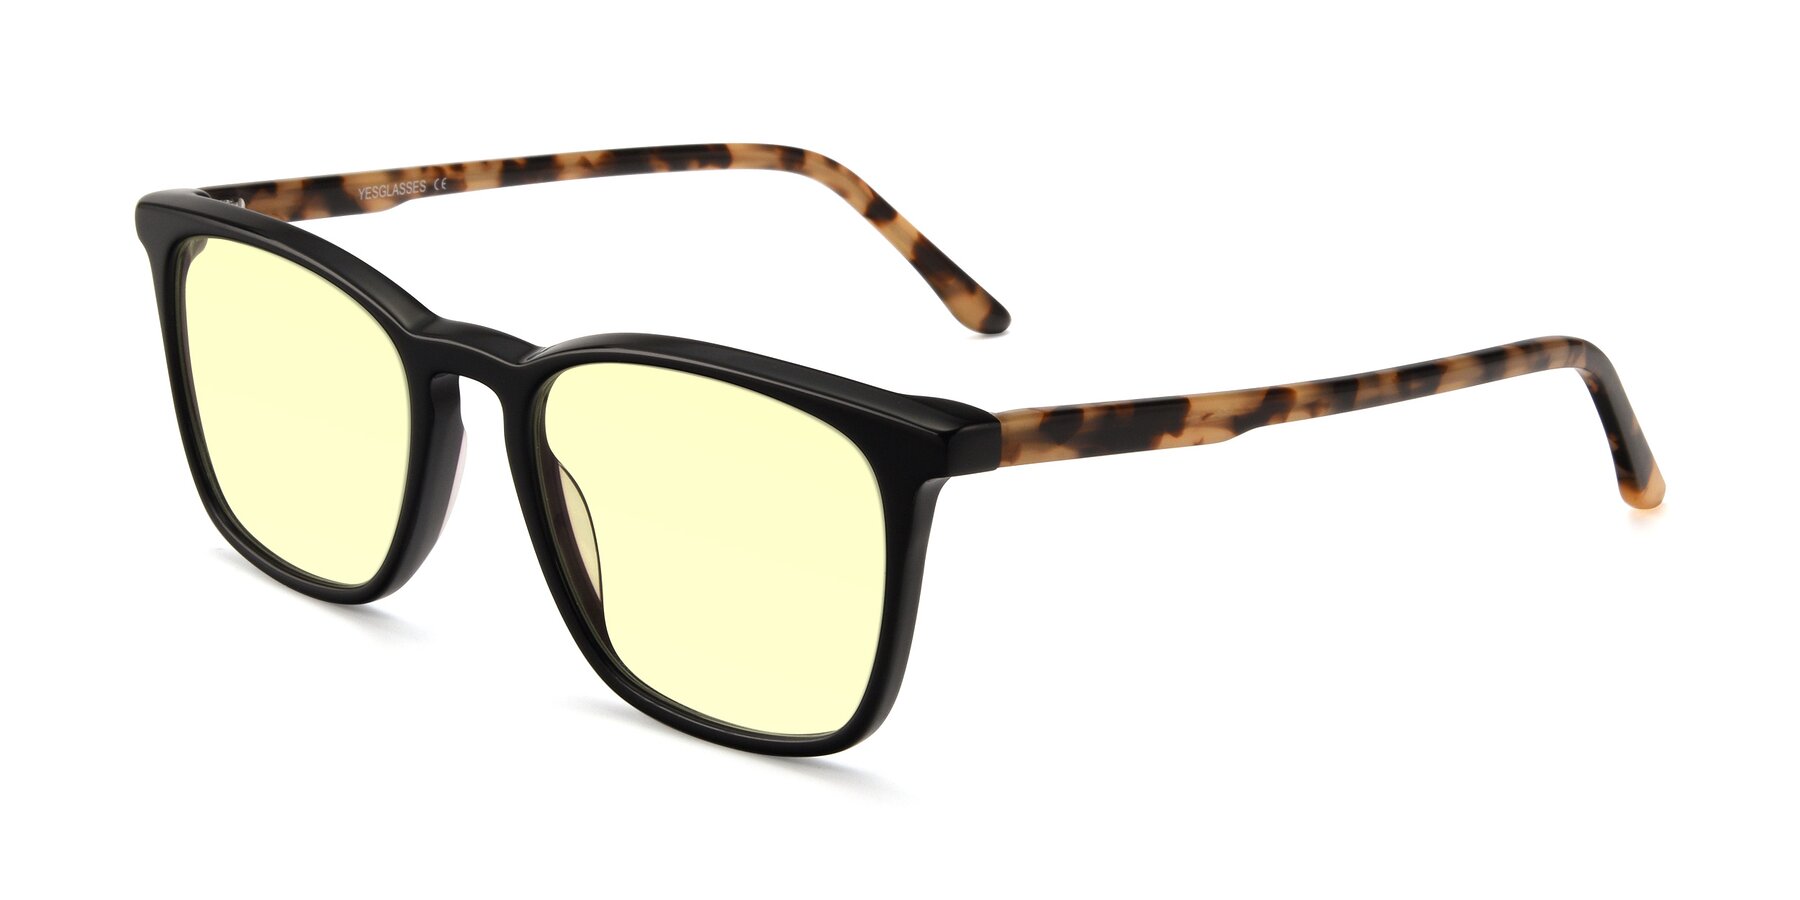 Angle of Vigor in Black-Tortoise with Light Yellow Tinted Lenses